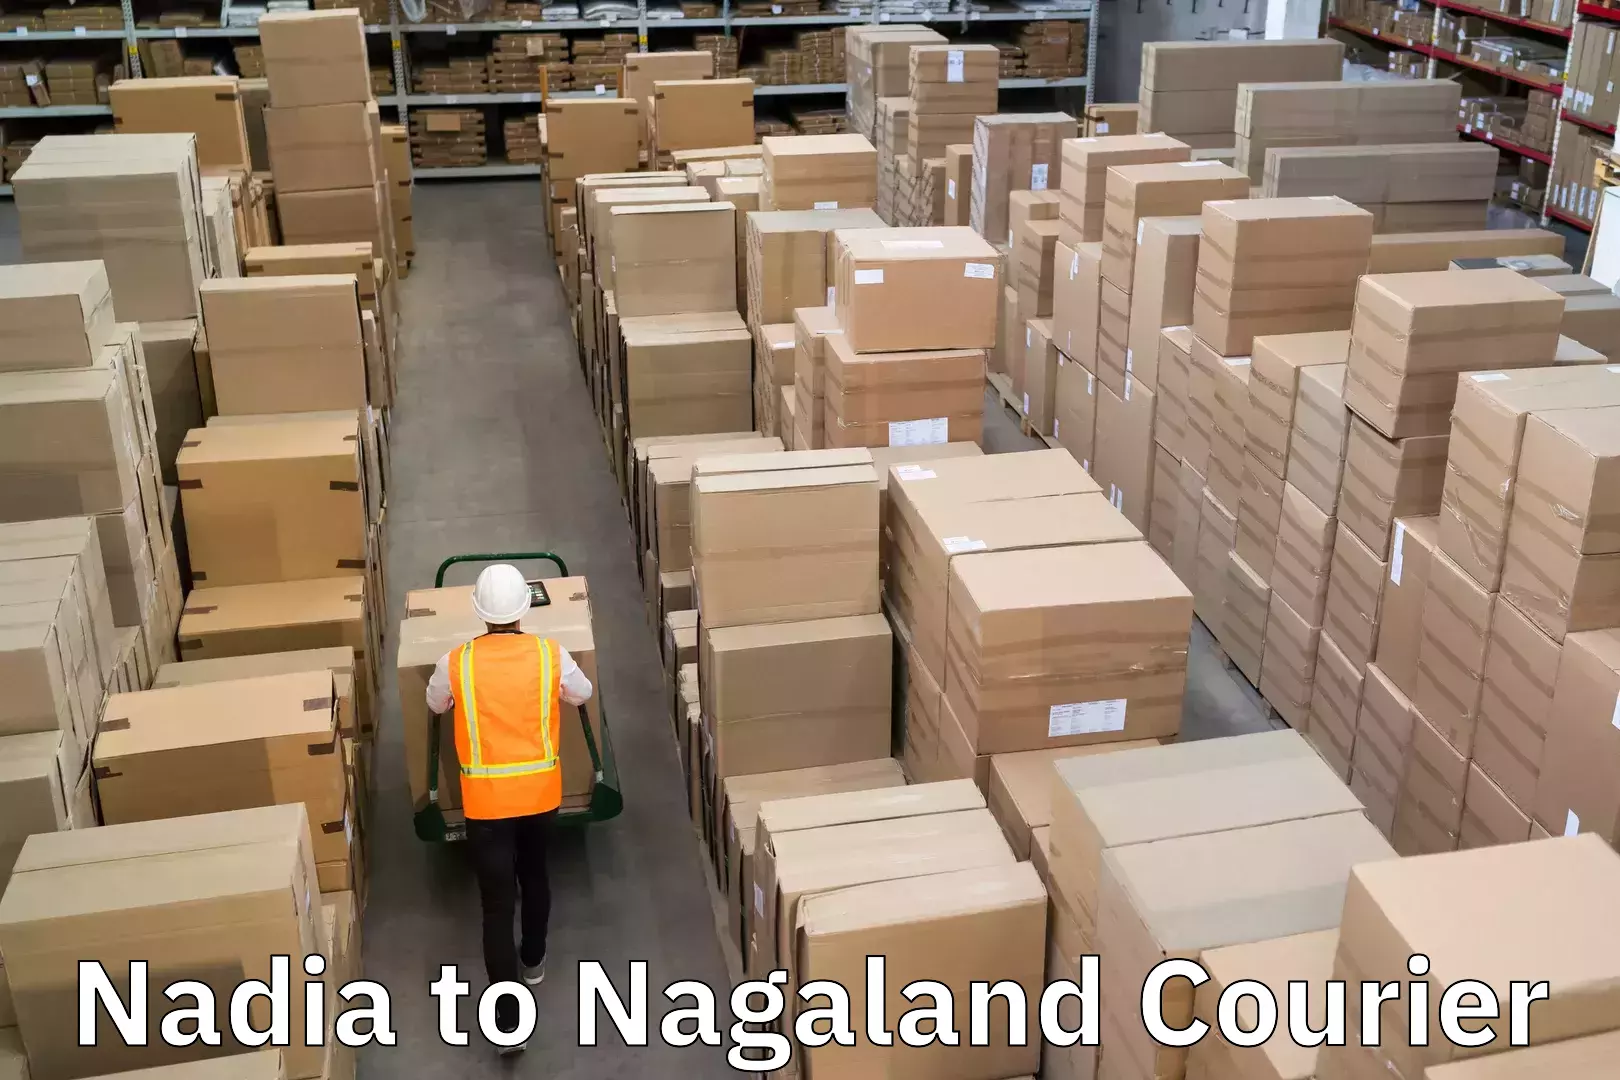 Courier service efficiency Nadia to Nagaland